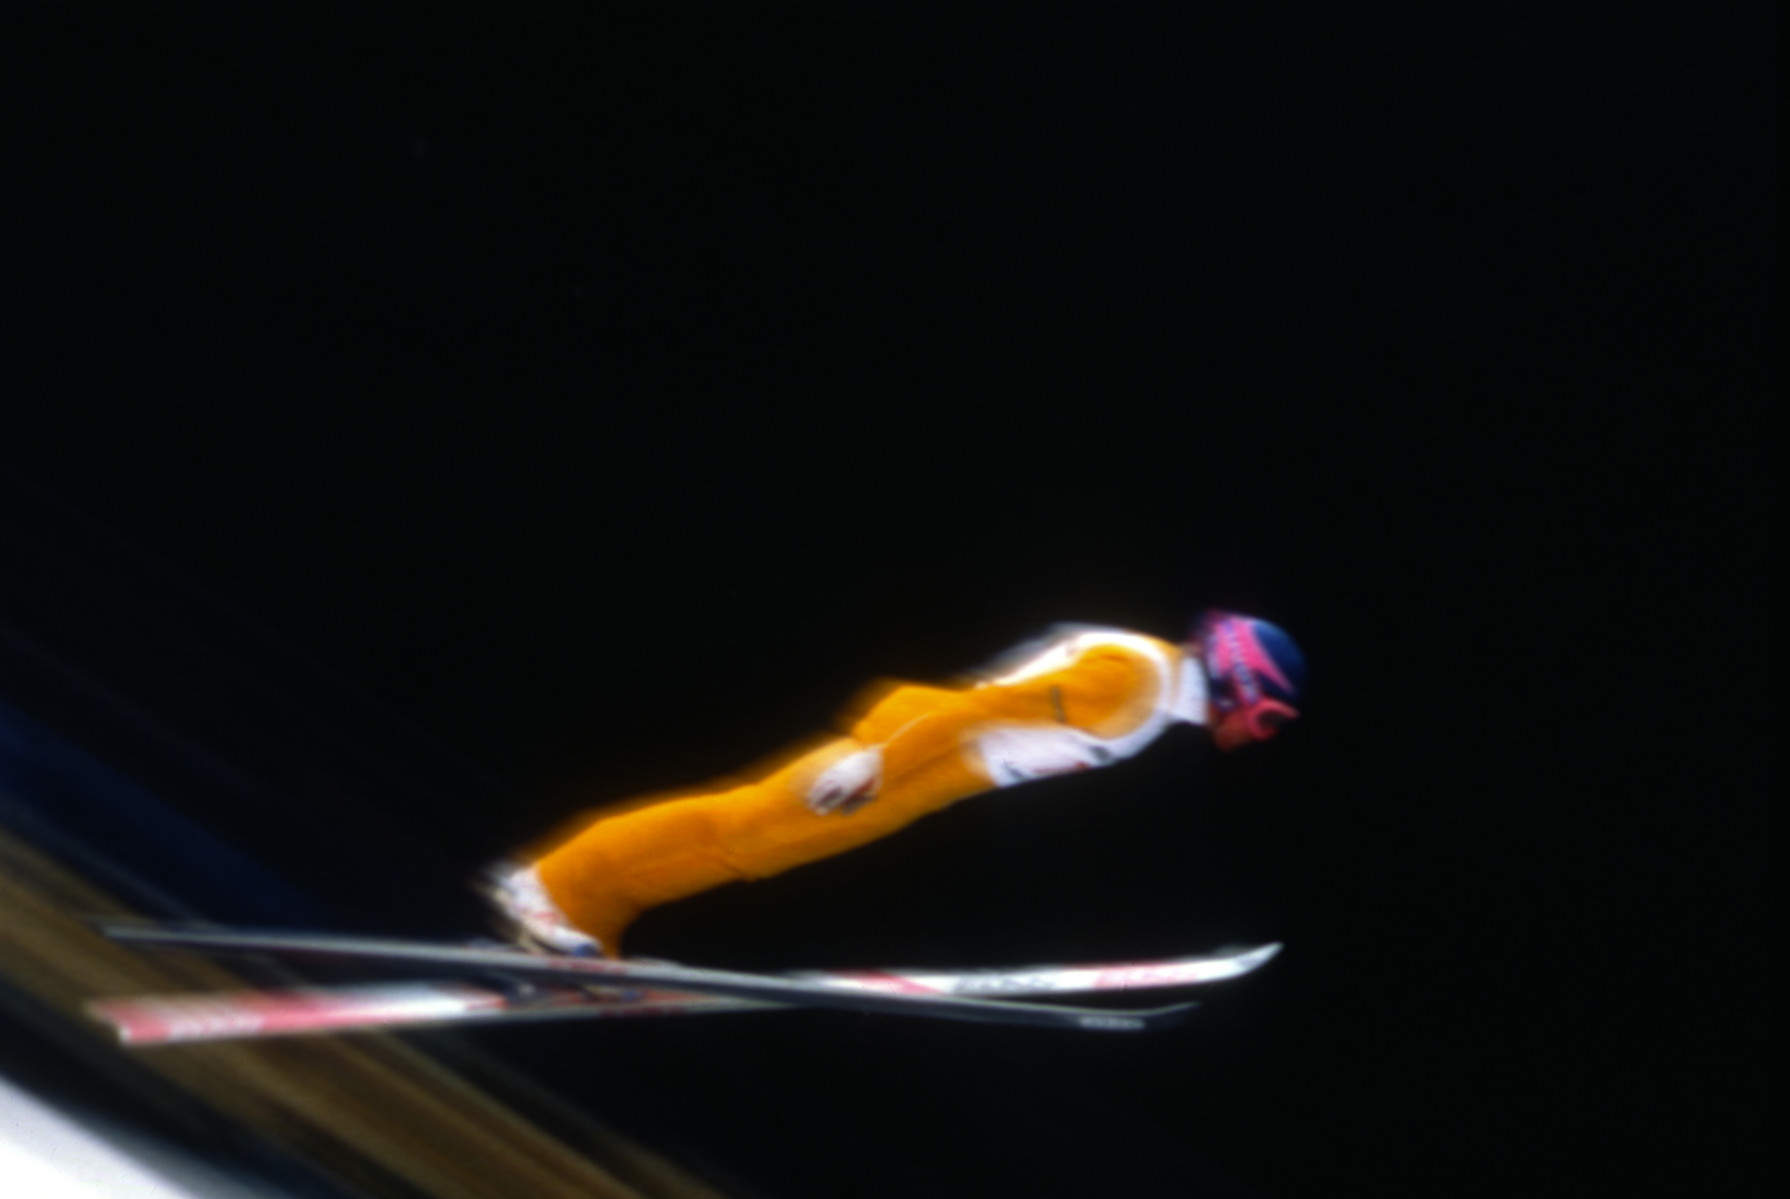 Ski Jumper
Lake Placid, New York : Sports : Photography by Adam Stoltman: Sports Photography, The Arts, Portraiture, Travel, Photojournalism and Fine Art in New York